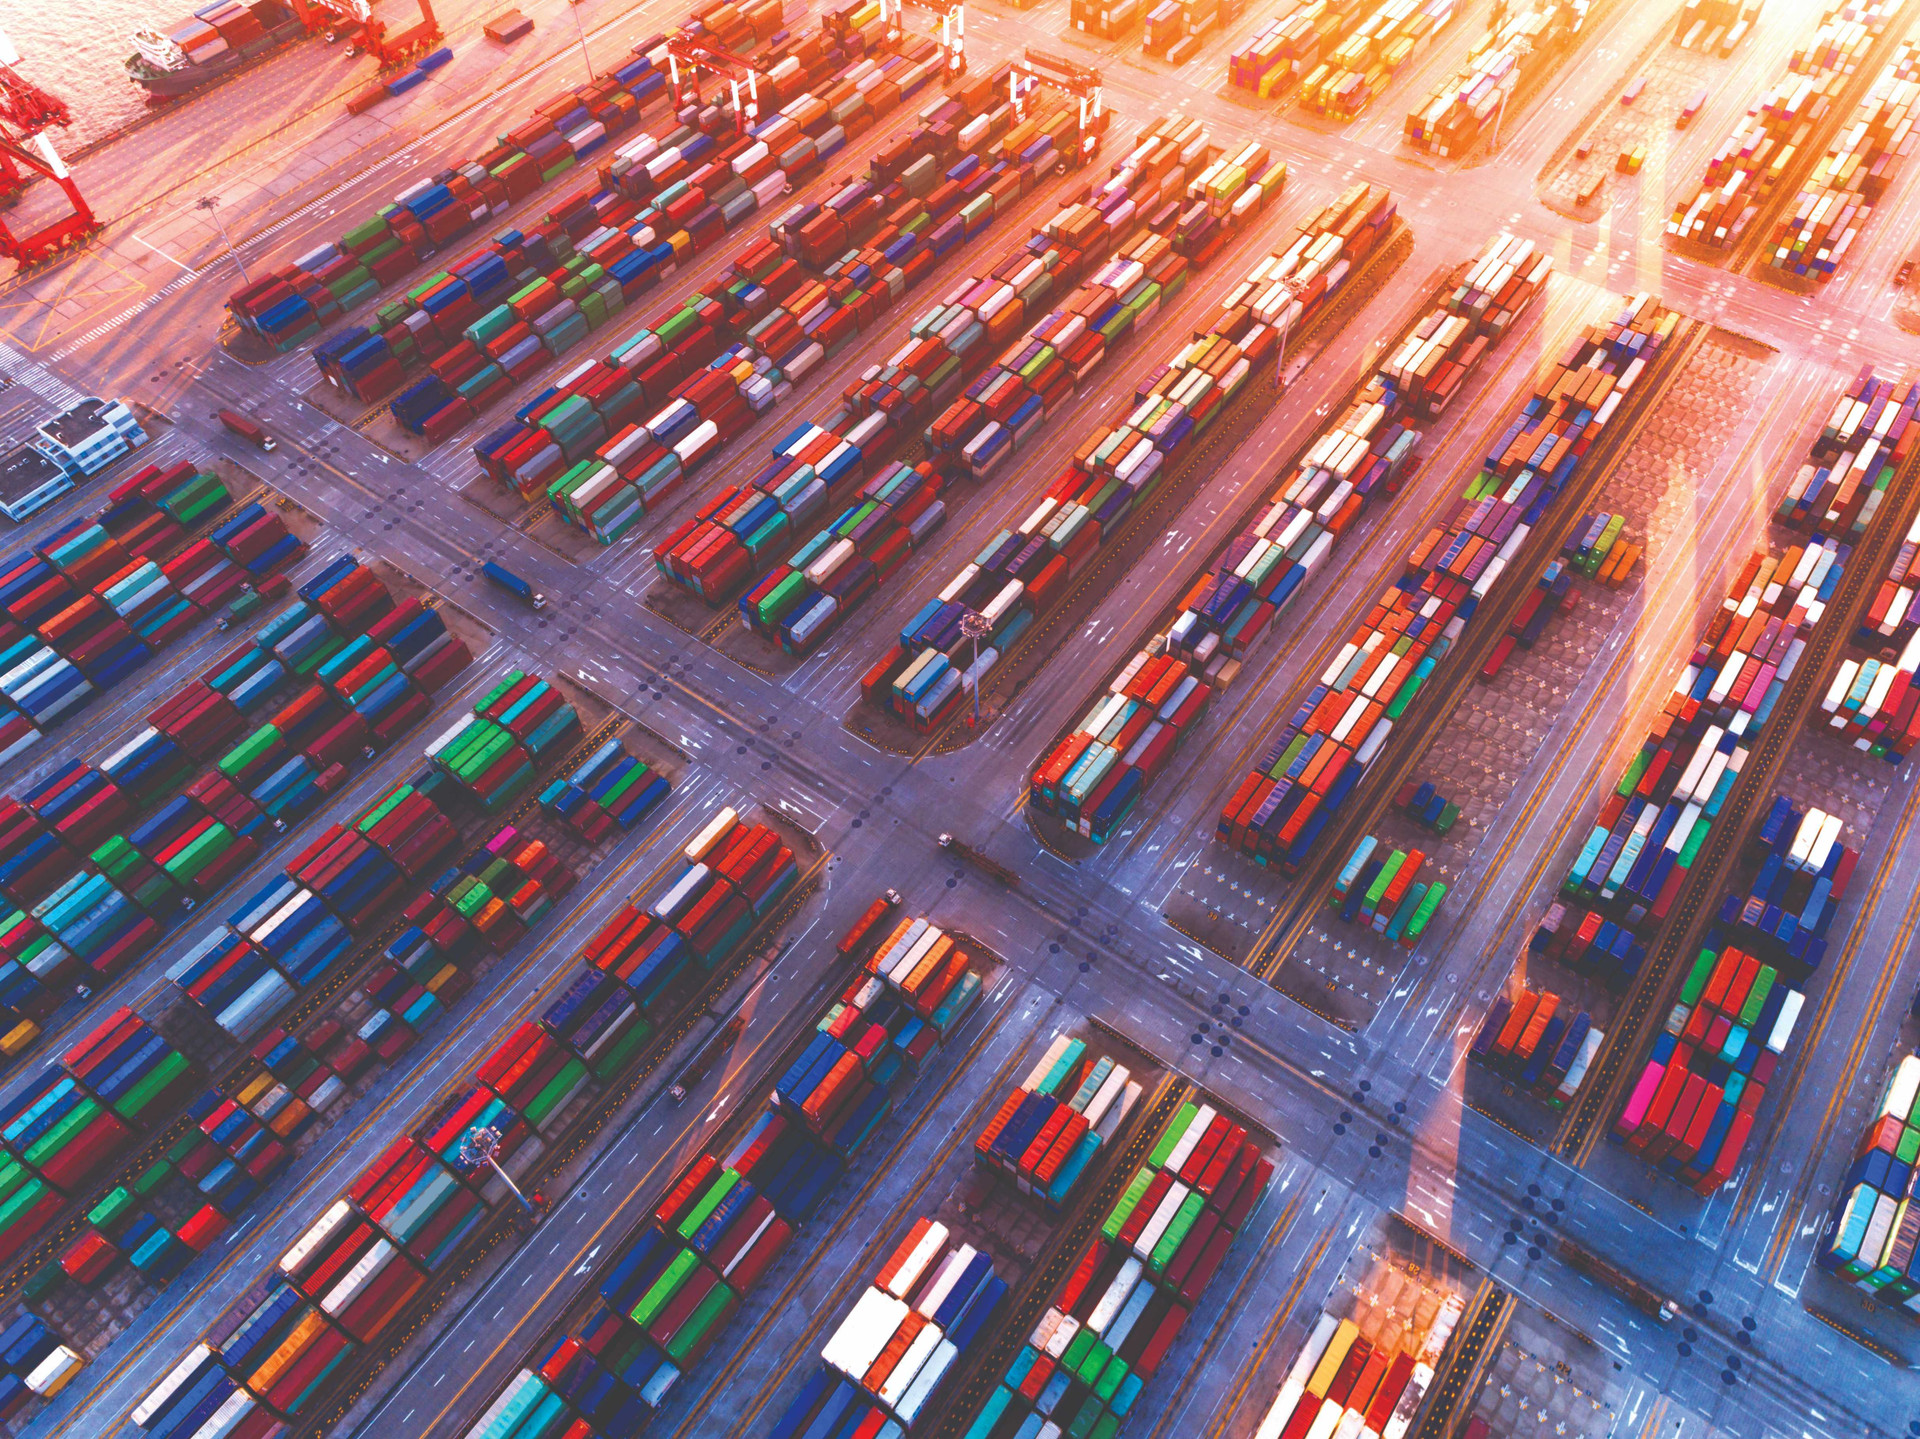 shanghai-container-terminal-dusk-one-largest-cargo-port-world-compressed.jpeg